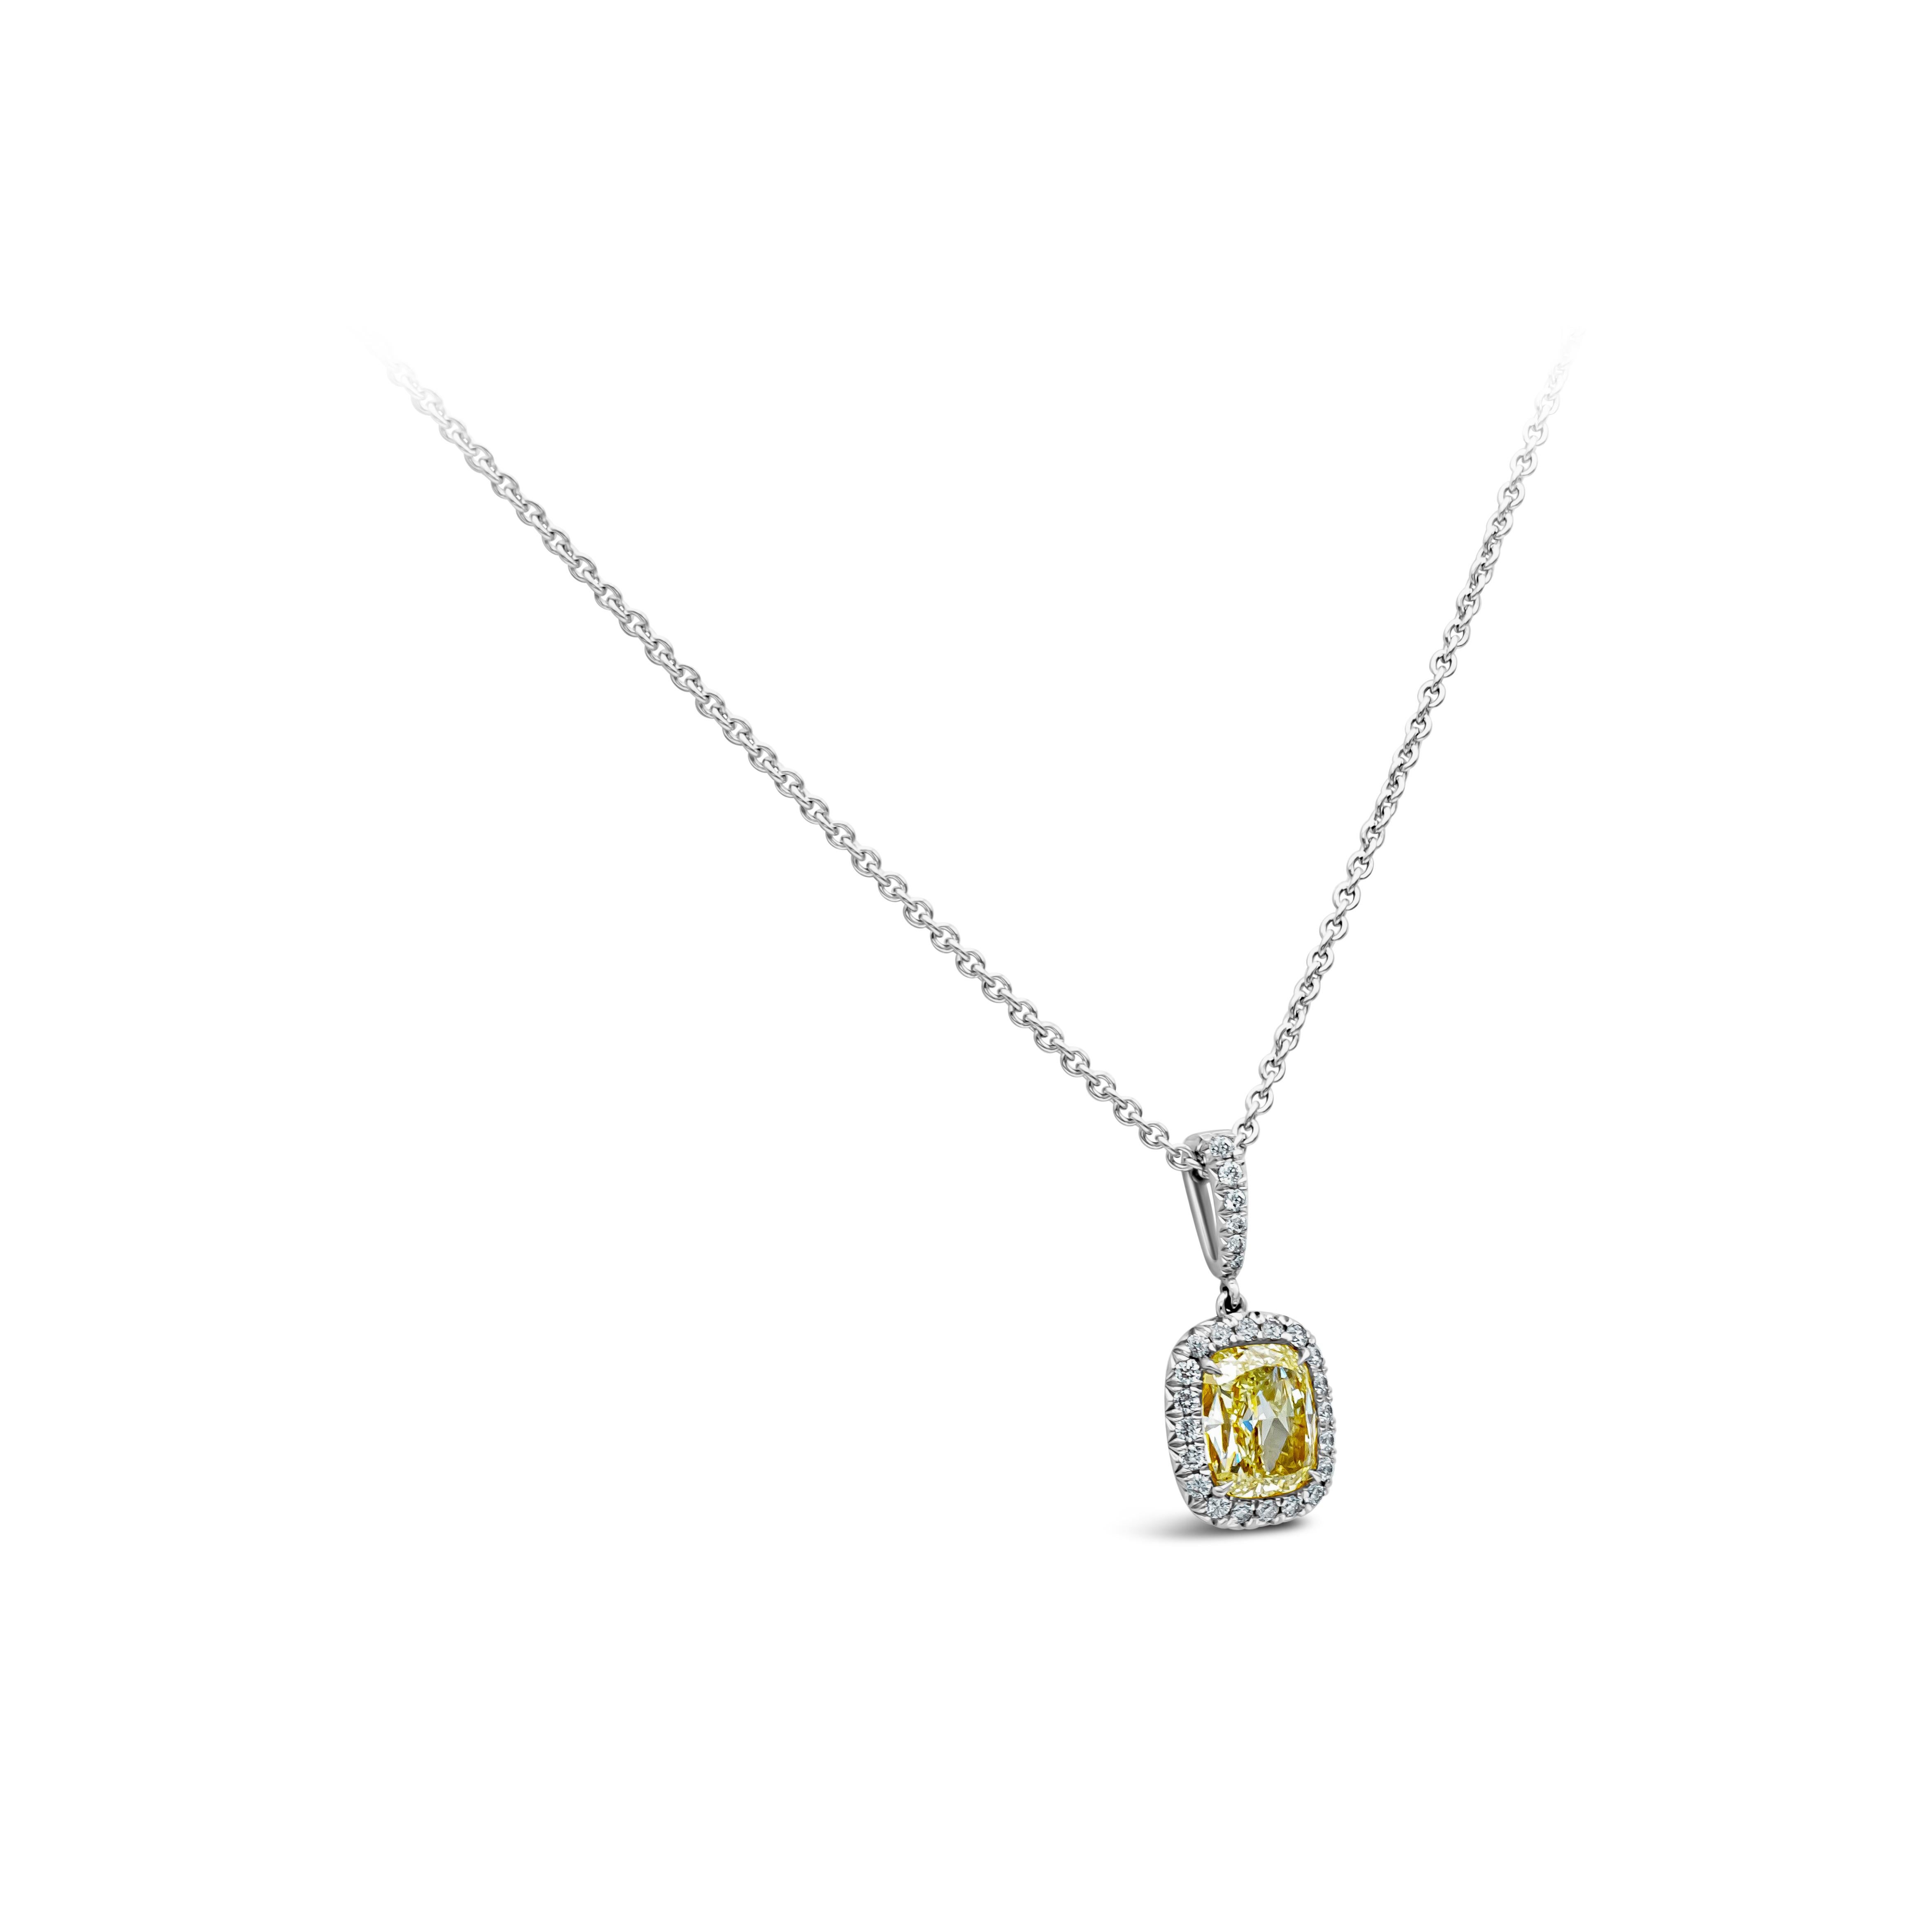 This classy and simple pendant necklace showcasing a color-rich GIA certified 1.55 carats cushion cut diamond, Y-Z color and SI1 clarity. Set in four prong Platinum setting. Surrounded by 26 brilliant round cut diamonds in a halo design, weighing in